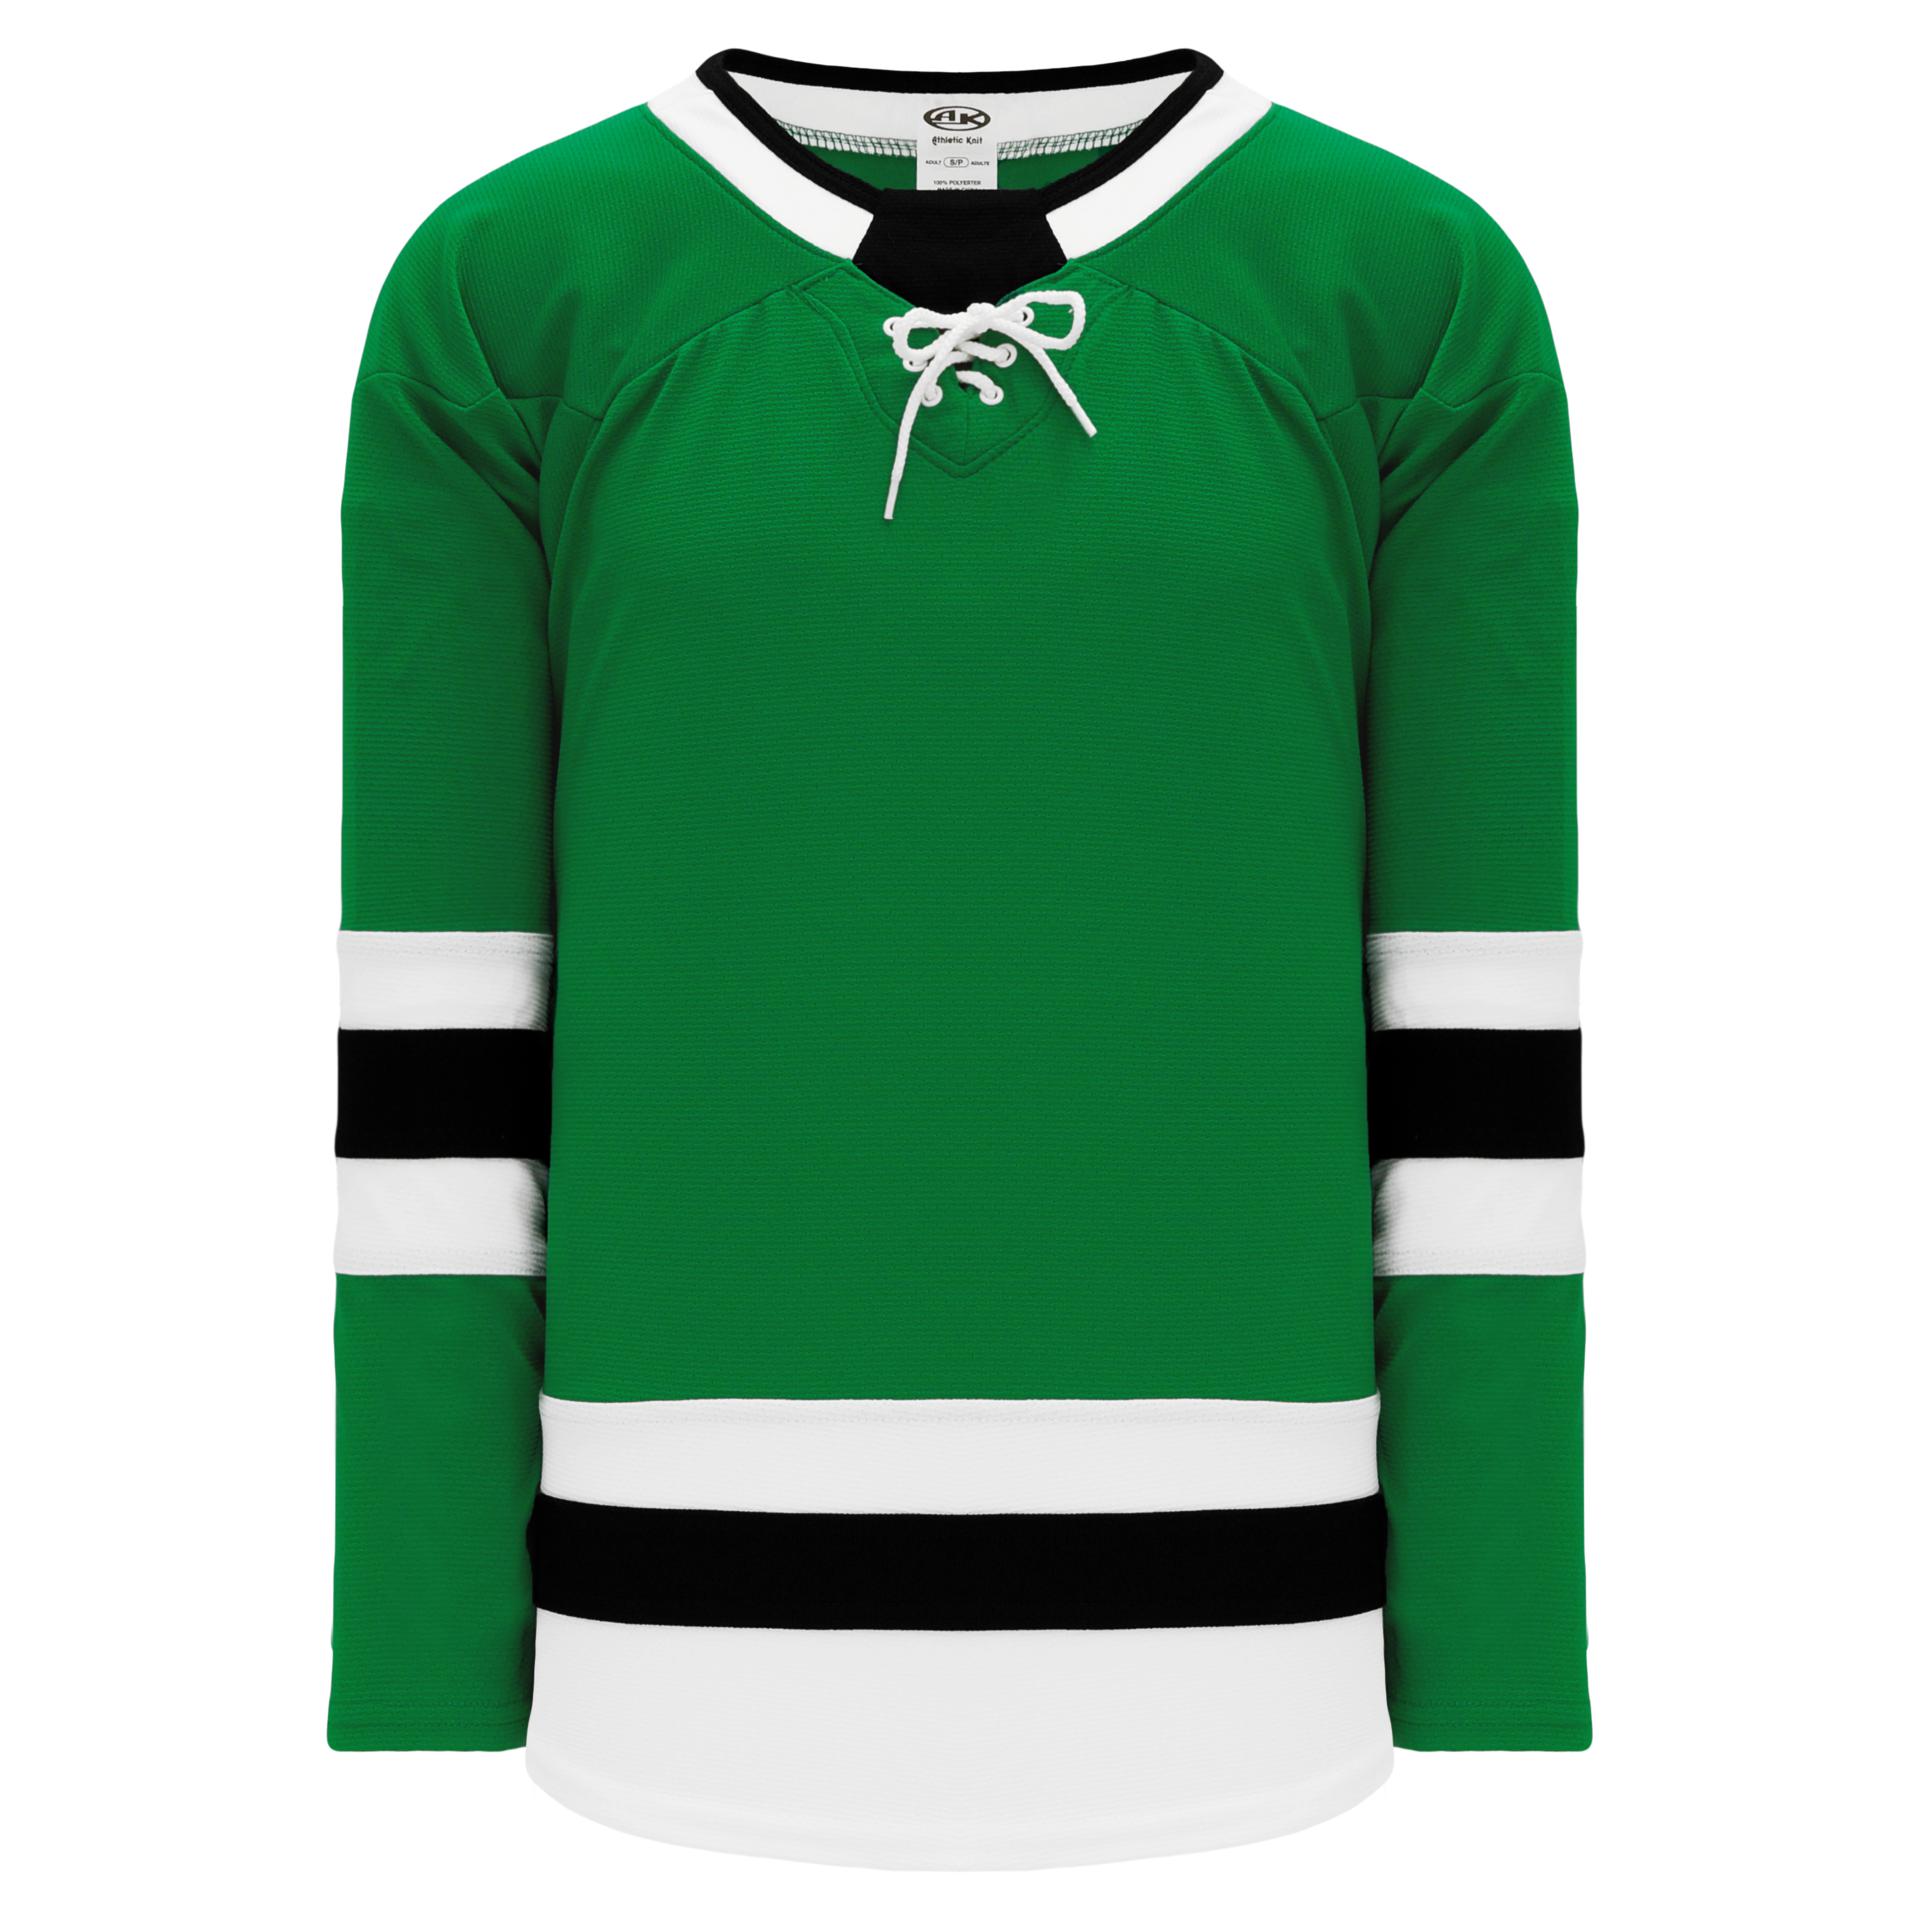 Vintage NHL Dallas Stars CCM Jersey YOUTH S/M White- Canada